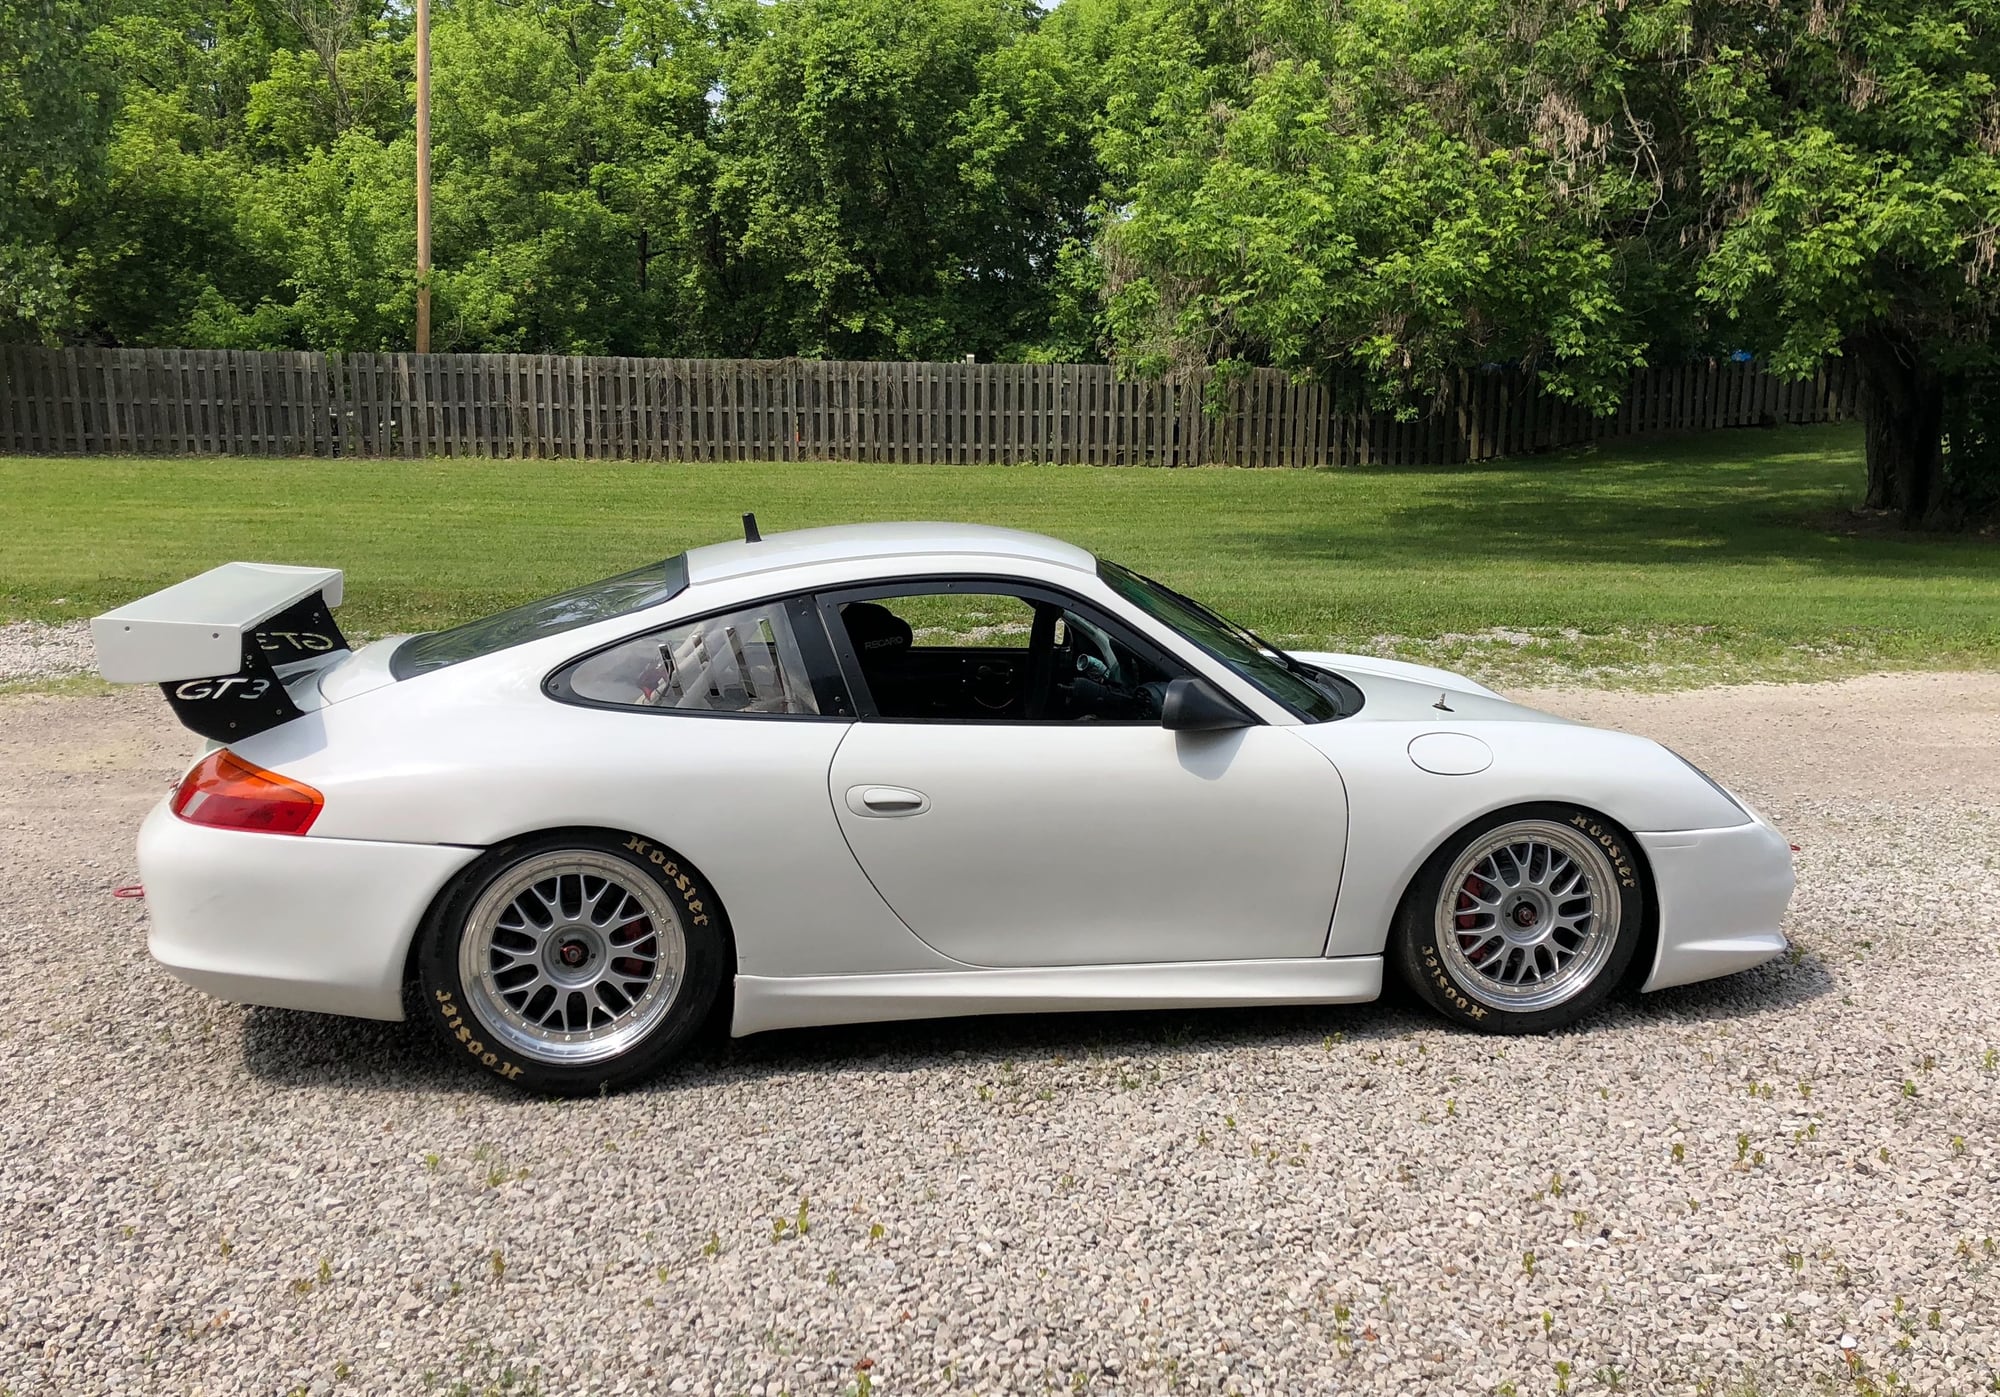 2004 Porsche 911 - 2003 Porsche GT3 Cup - Used - VIN 12345678901234567 - 6 cyl - 2WD - Manual - Coupe - White - Cleveland, OH 44140, United States